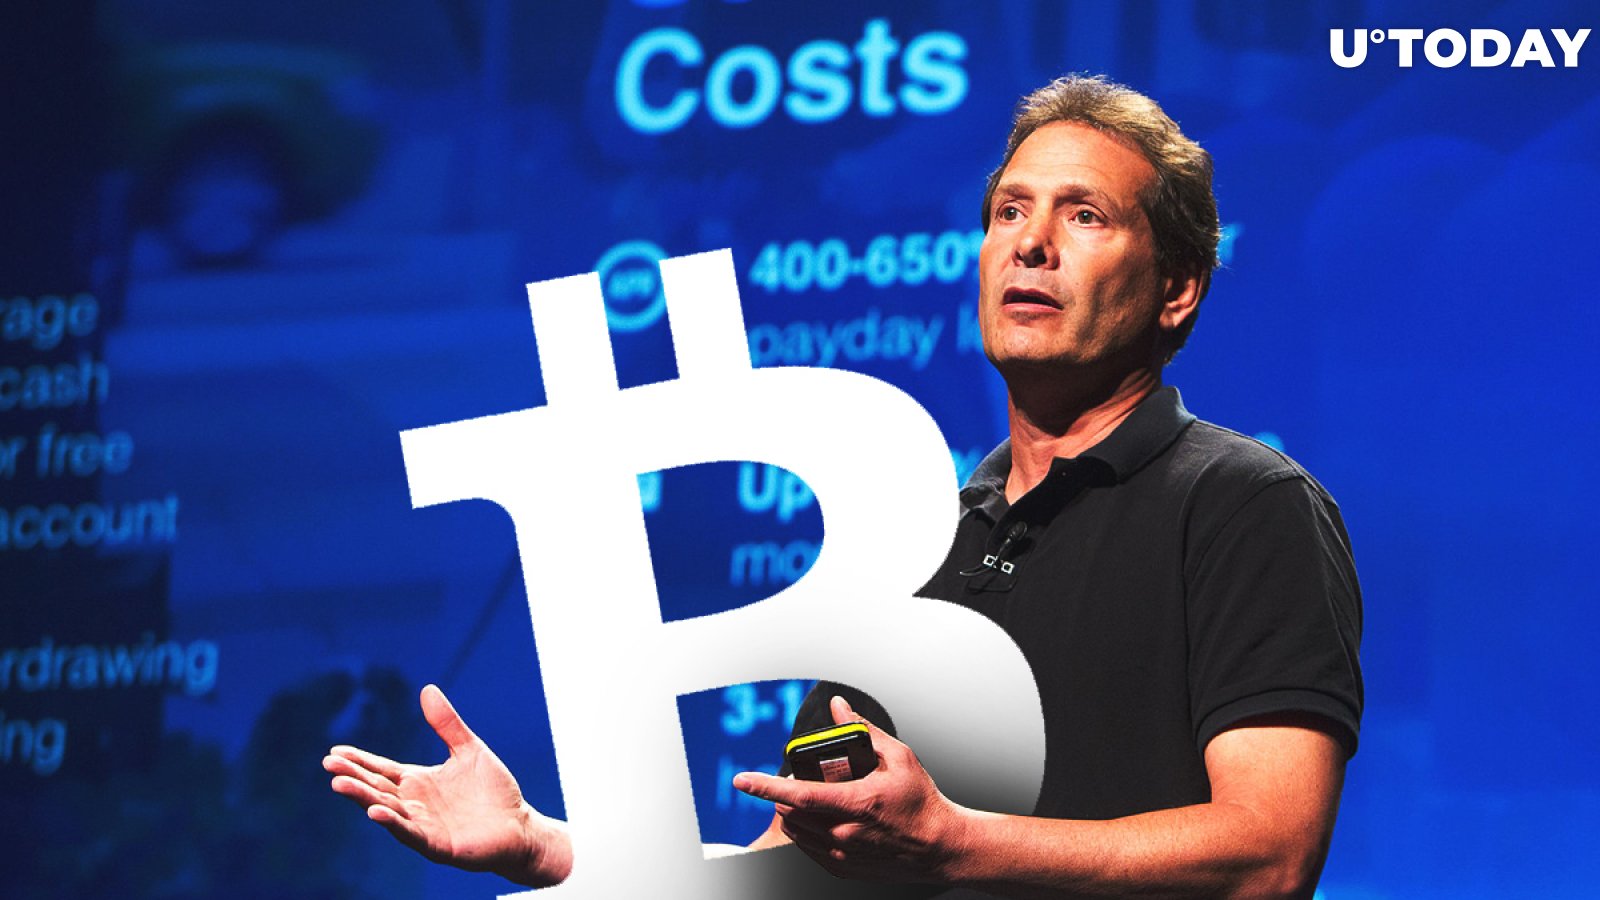 Bitcoin Is the Only Crypto Owned by PayPal CEO Dan Schulman